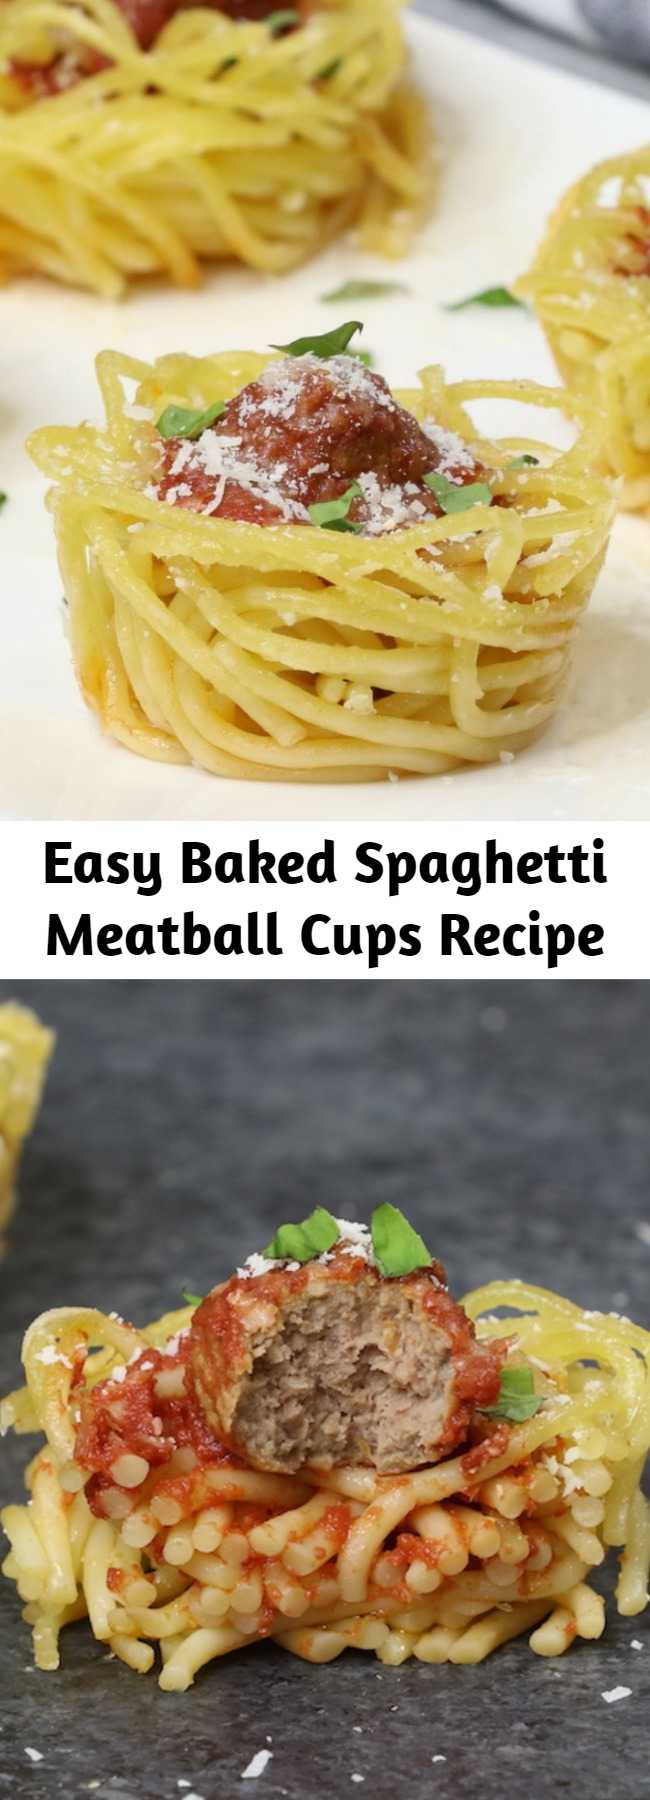 Easy Baked Spaghetti Meatball Cups Recipe - Baked Spaghetti and Meatball Cups are a flavorful bite-size appetizer that's fun to make and share, plus they're a fabulous way to use up leftover spaghetti. All you need is some pasta sauce, meatballs, parmesan cheese and an optional egg to hold them together. Easy to make ahead of time for a party.